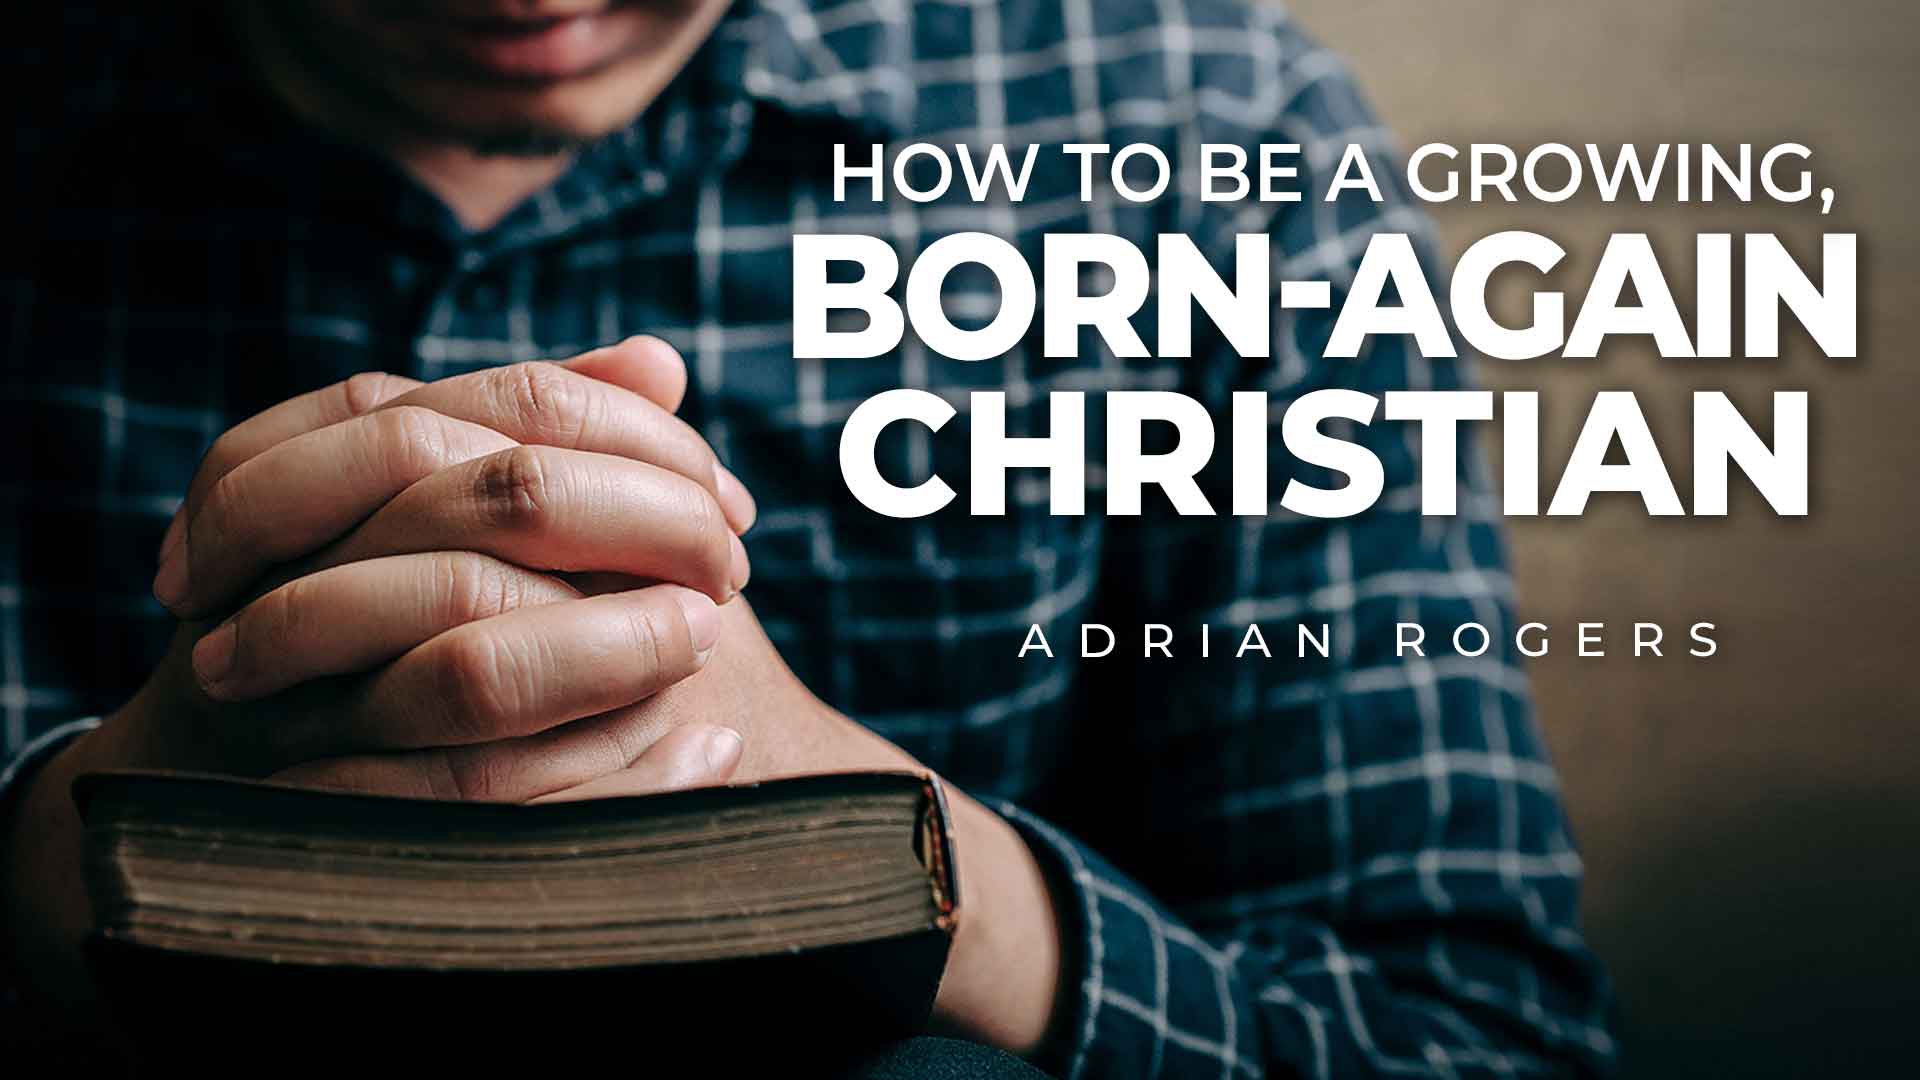 How to Be a Growing Born-Again Christian 1920x1080